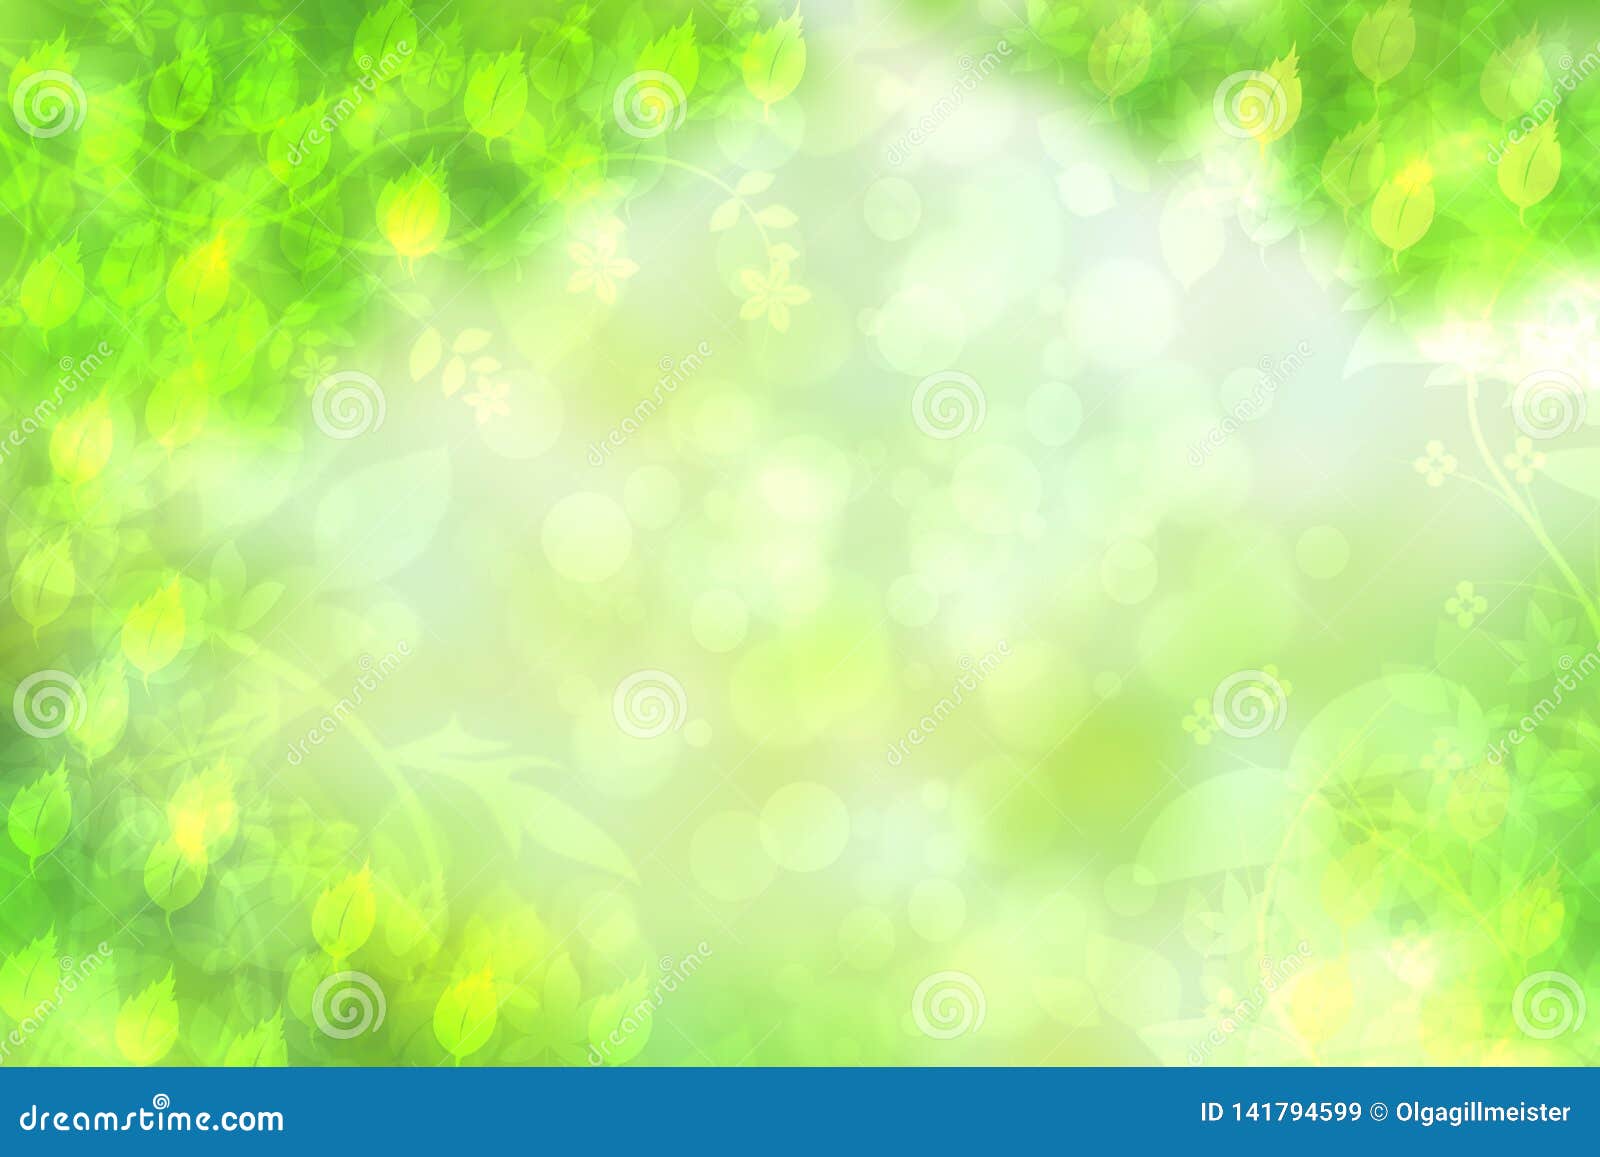 Abstract Natural Spring Light Green and Yellow Background Texture with  Leaves and Branches. Space for Design Stock Illustration - Illustration of  design, light: 141794599